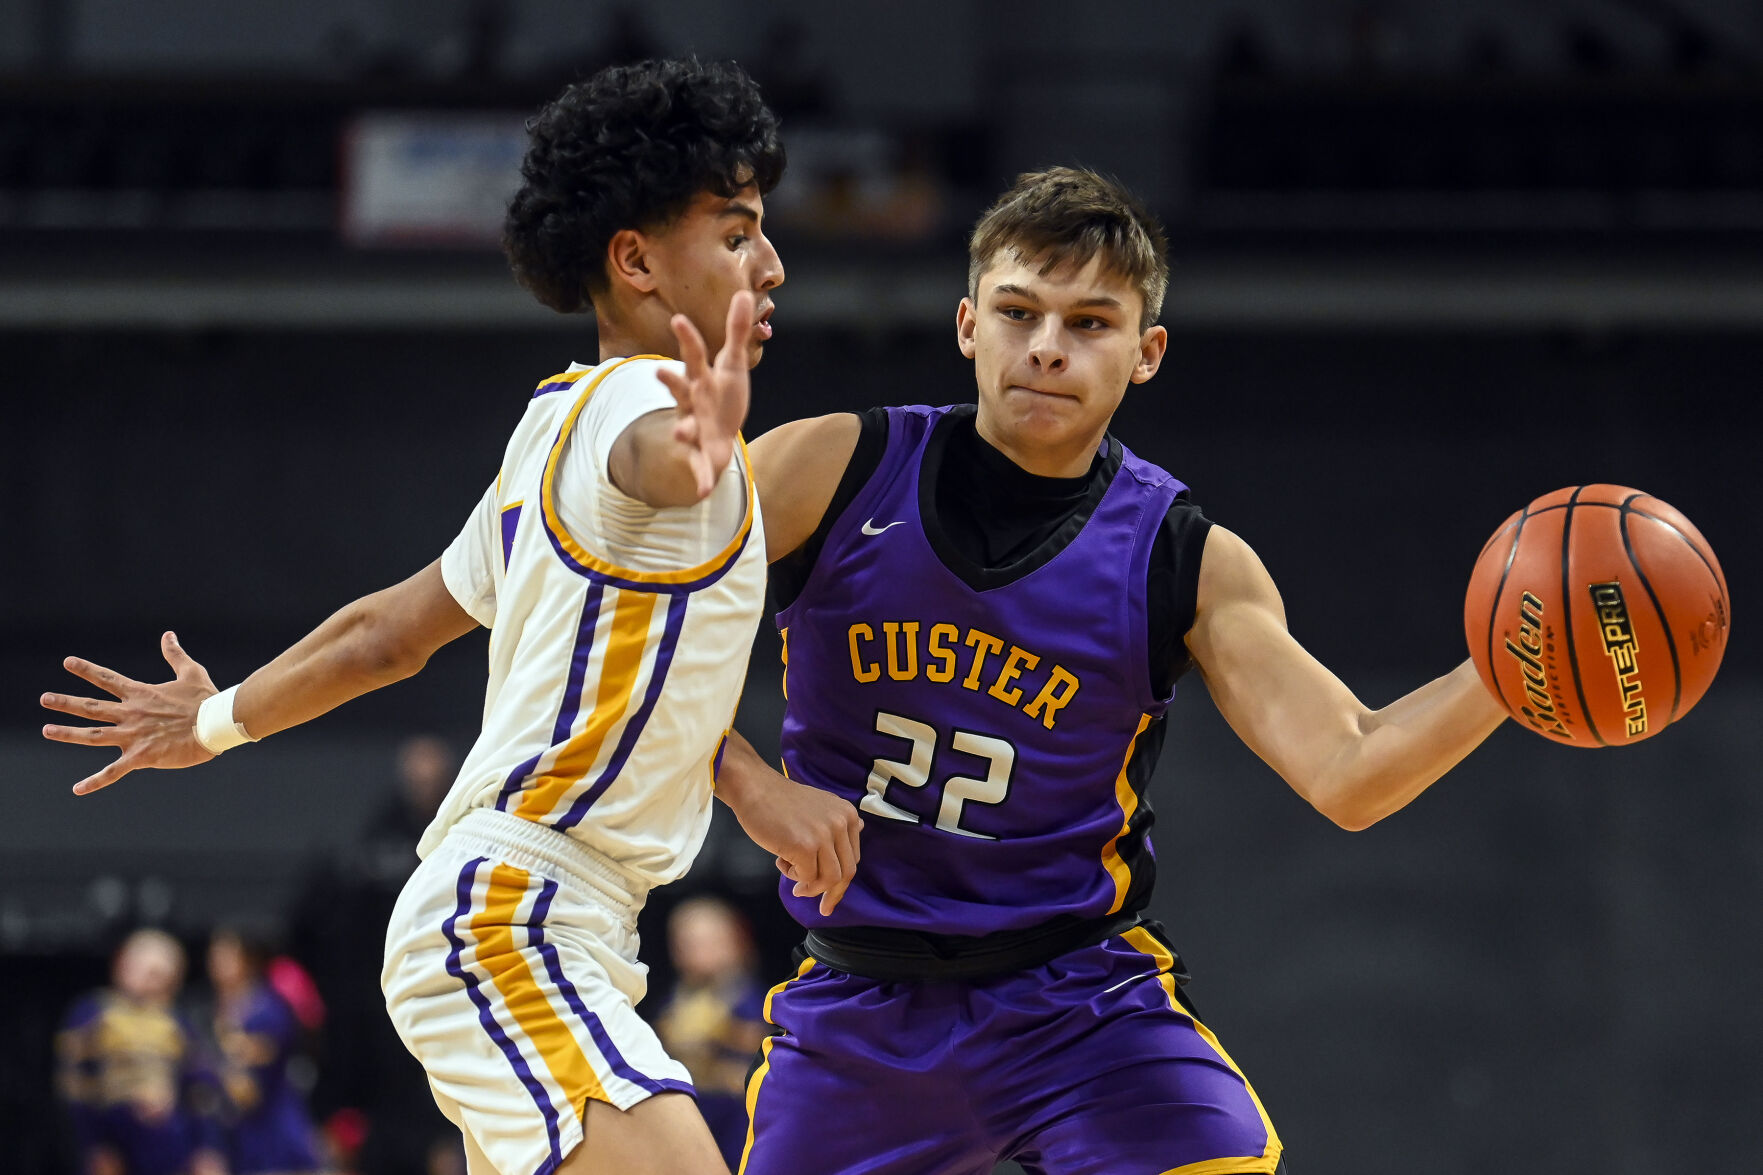 Custer upsets No. 5 STM and more from Thursday’s high school basketball action